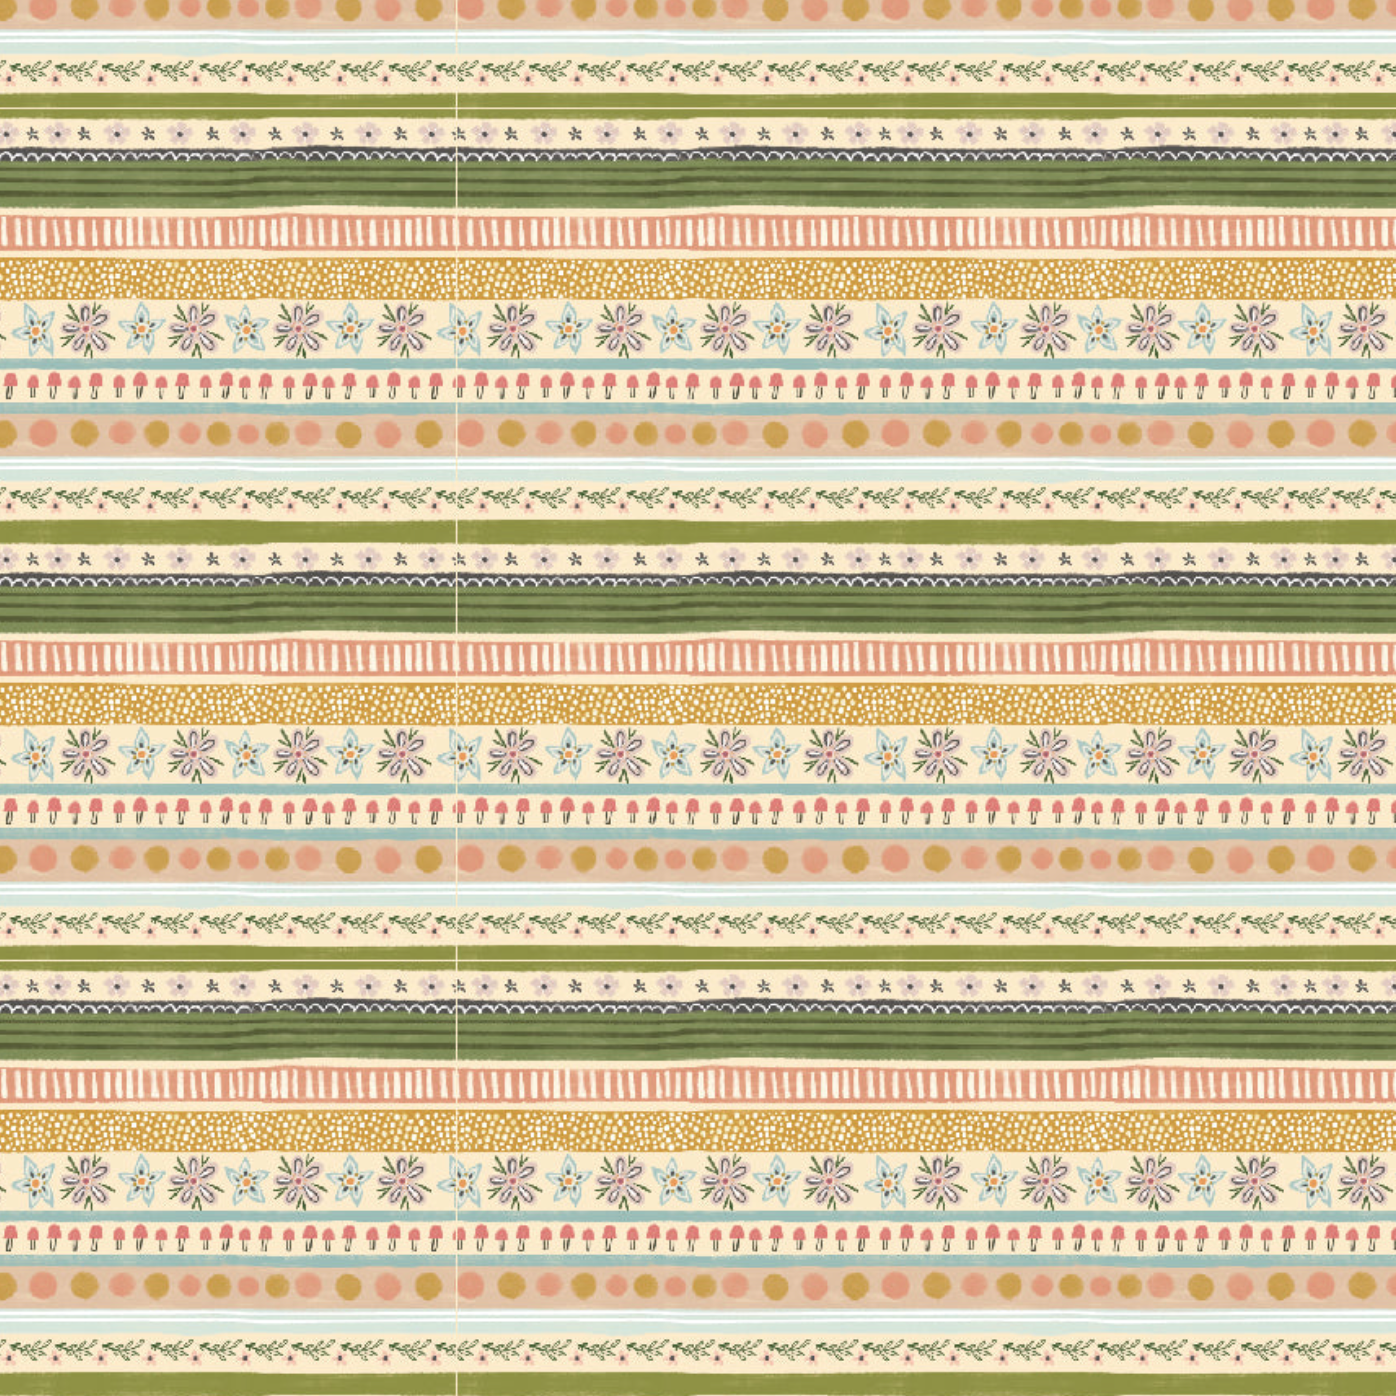 Cottage Charm, Garden Stripe Yellow, CH24758, sold by the 1/2 yard, *PREORDER